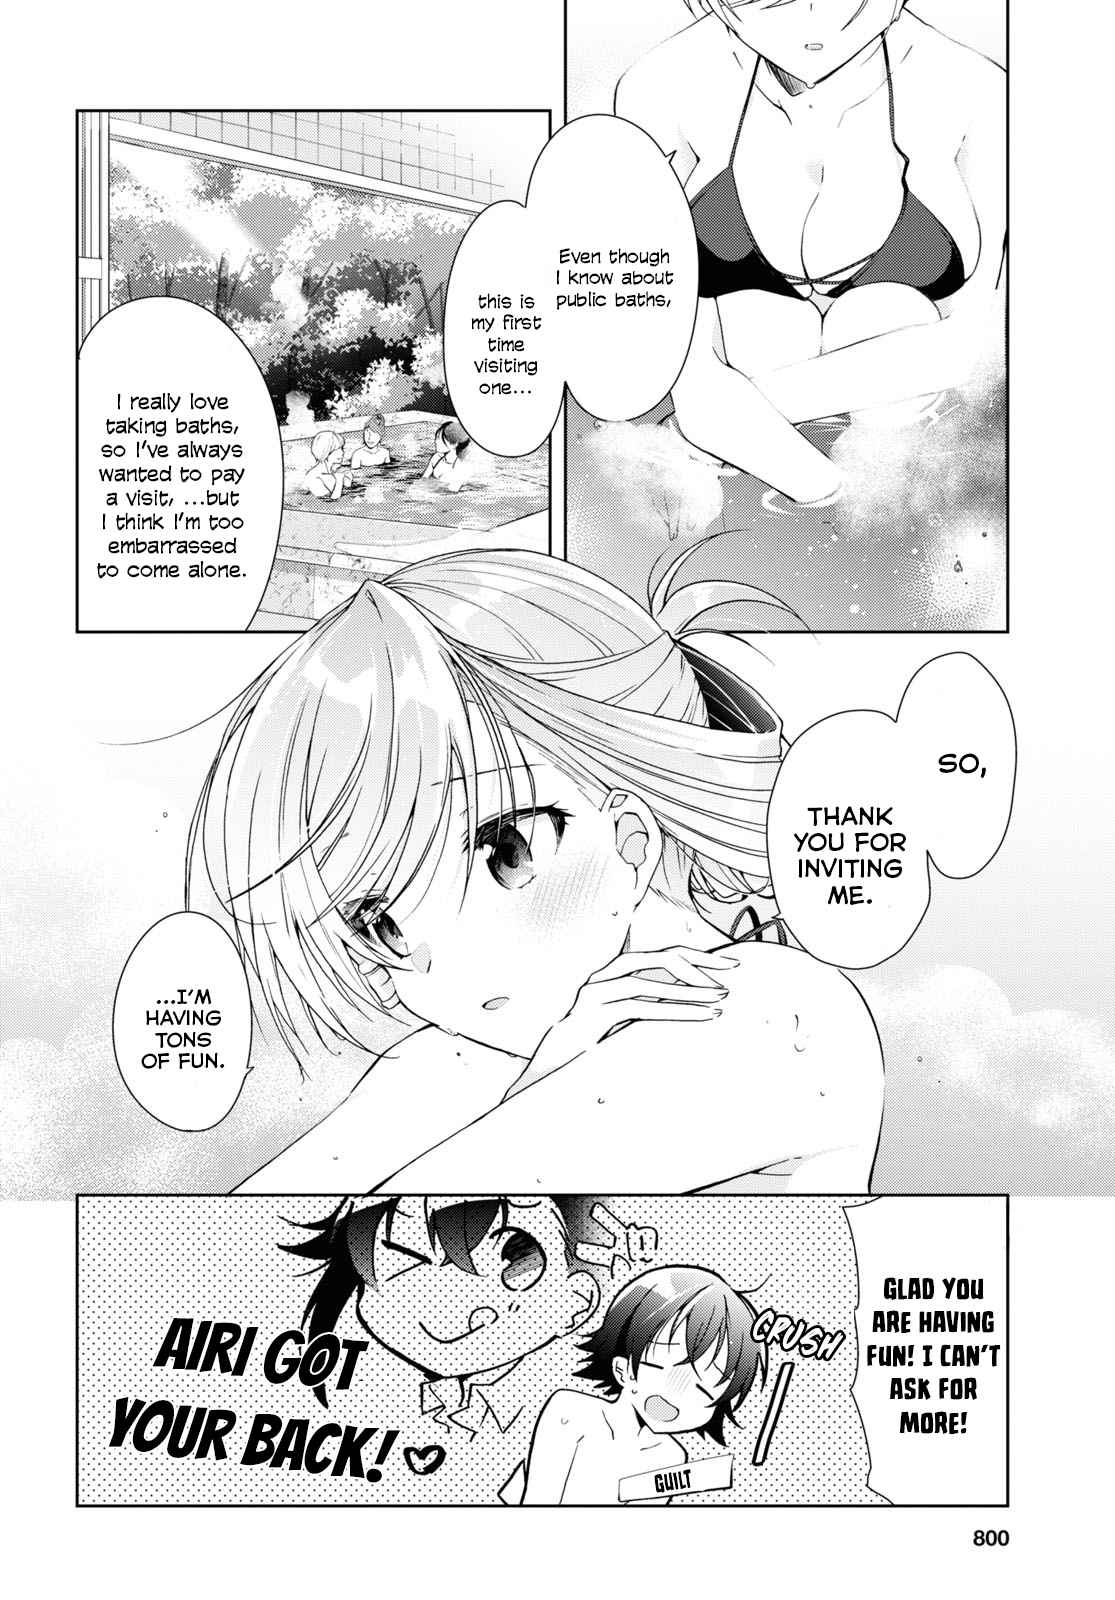 Isshiki-san Wants to Know About Love. - chapter 11 - #4